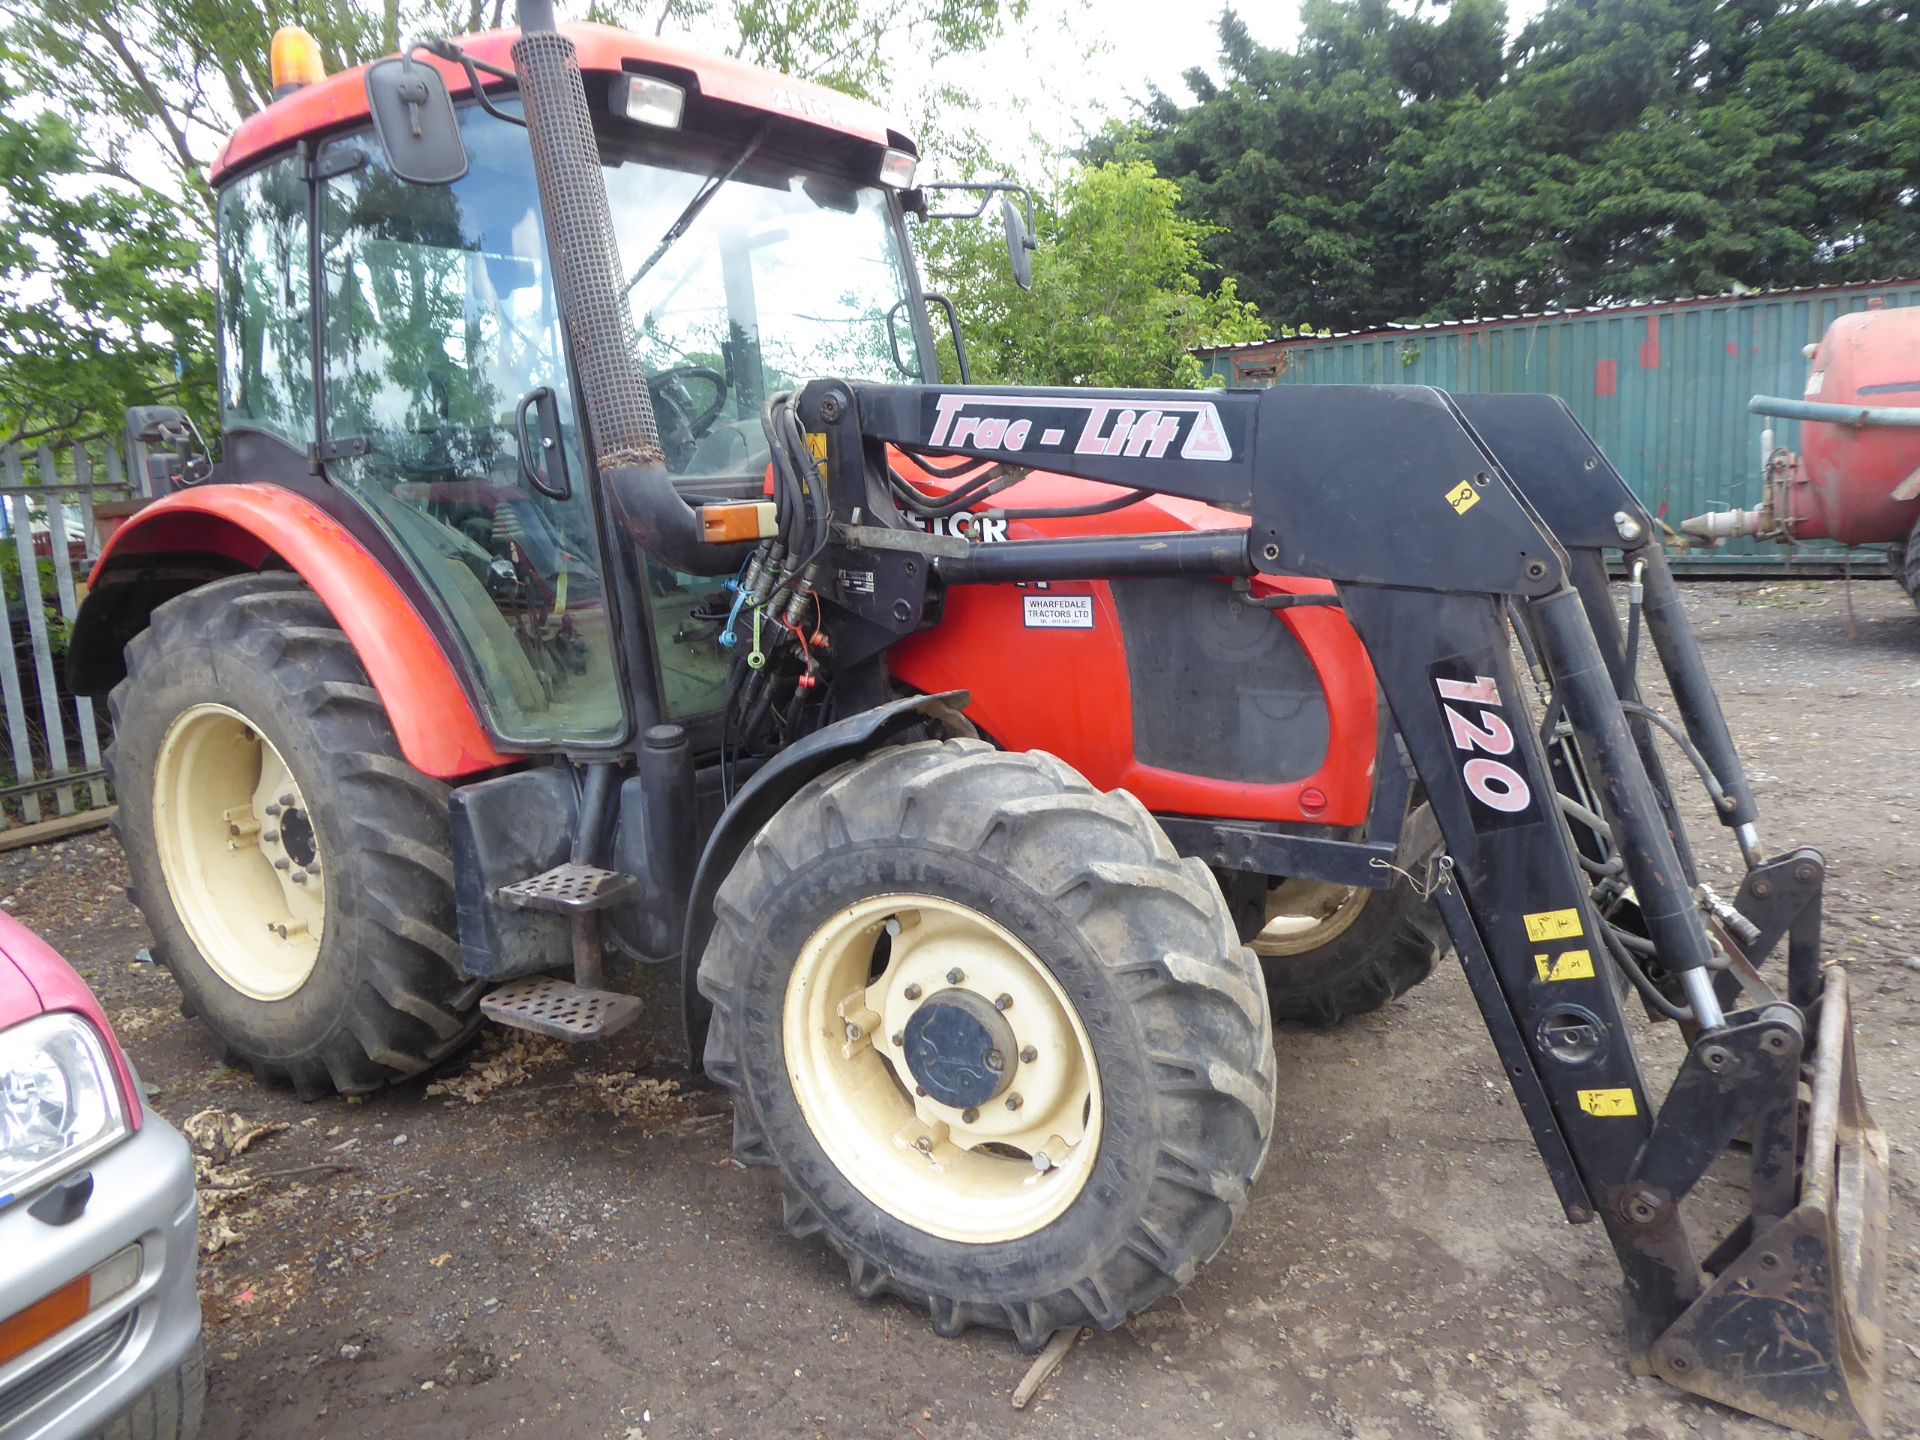 Zetor 8441 Proxima tractor c/w Traclift loader, 2005, 6433Hrs, YJ05 URB - Image 3 of 3